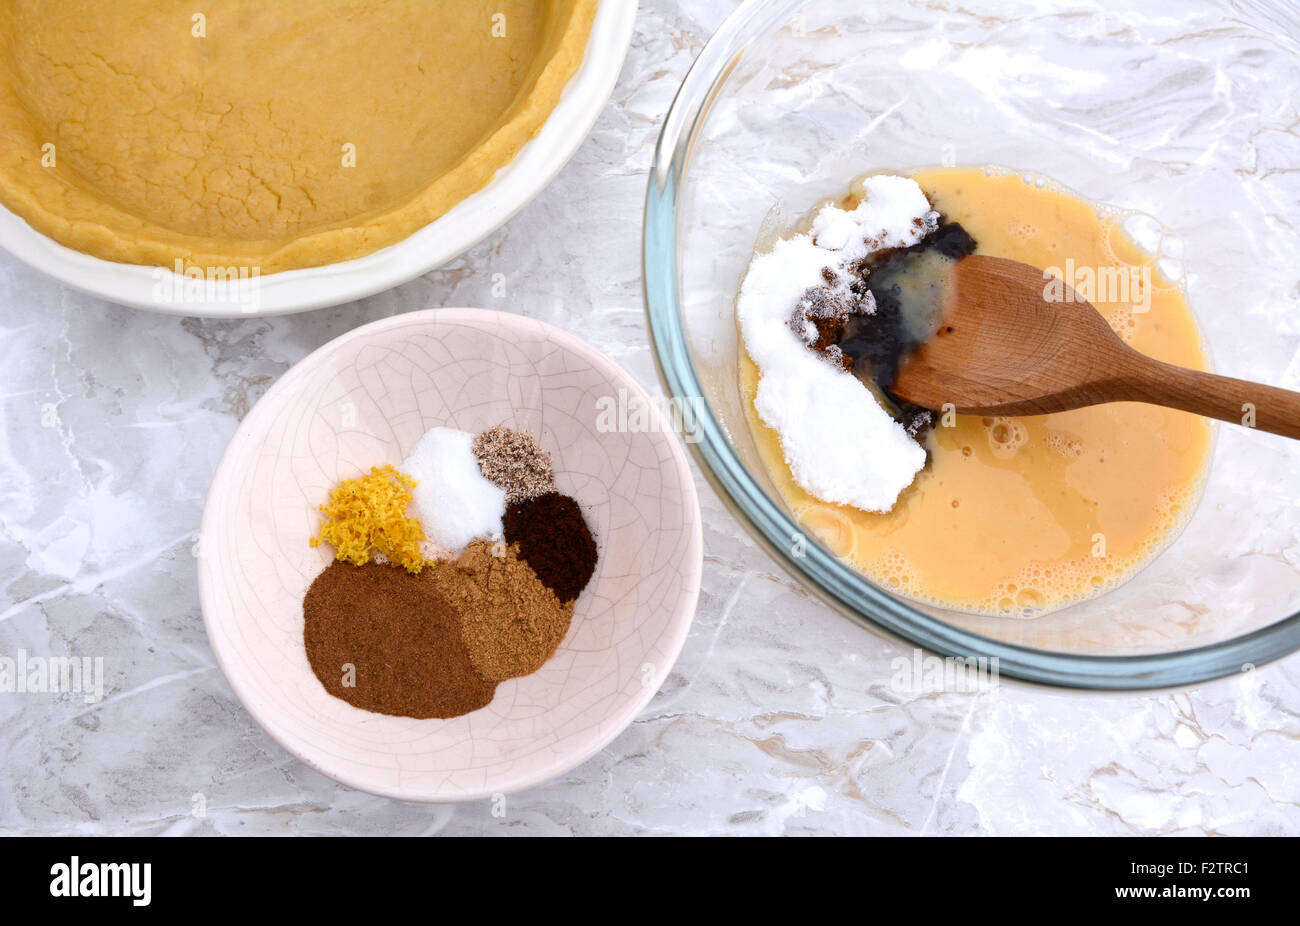 Ingredients for pumpkin pie filling - spices, sugars and egg - with pie shell Stock Photo